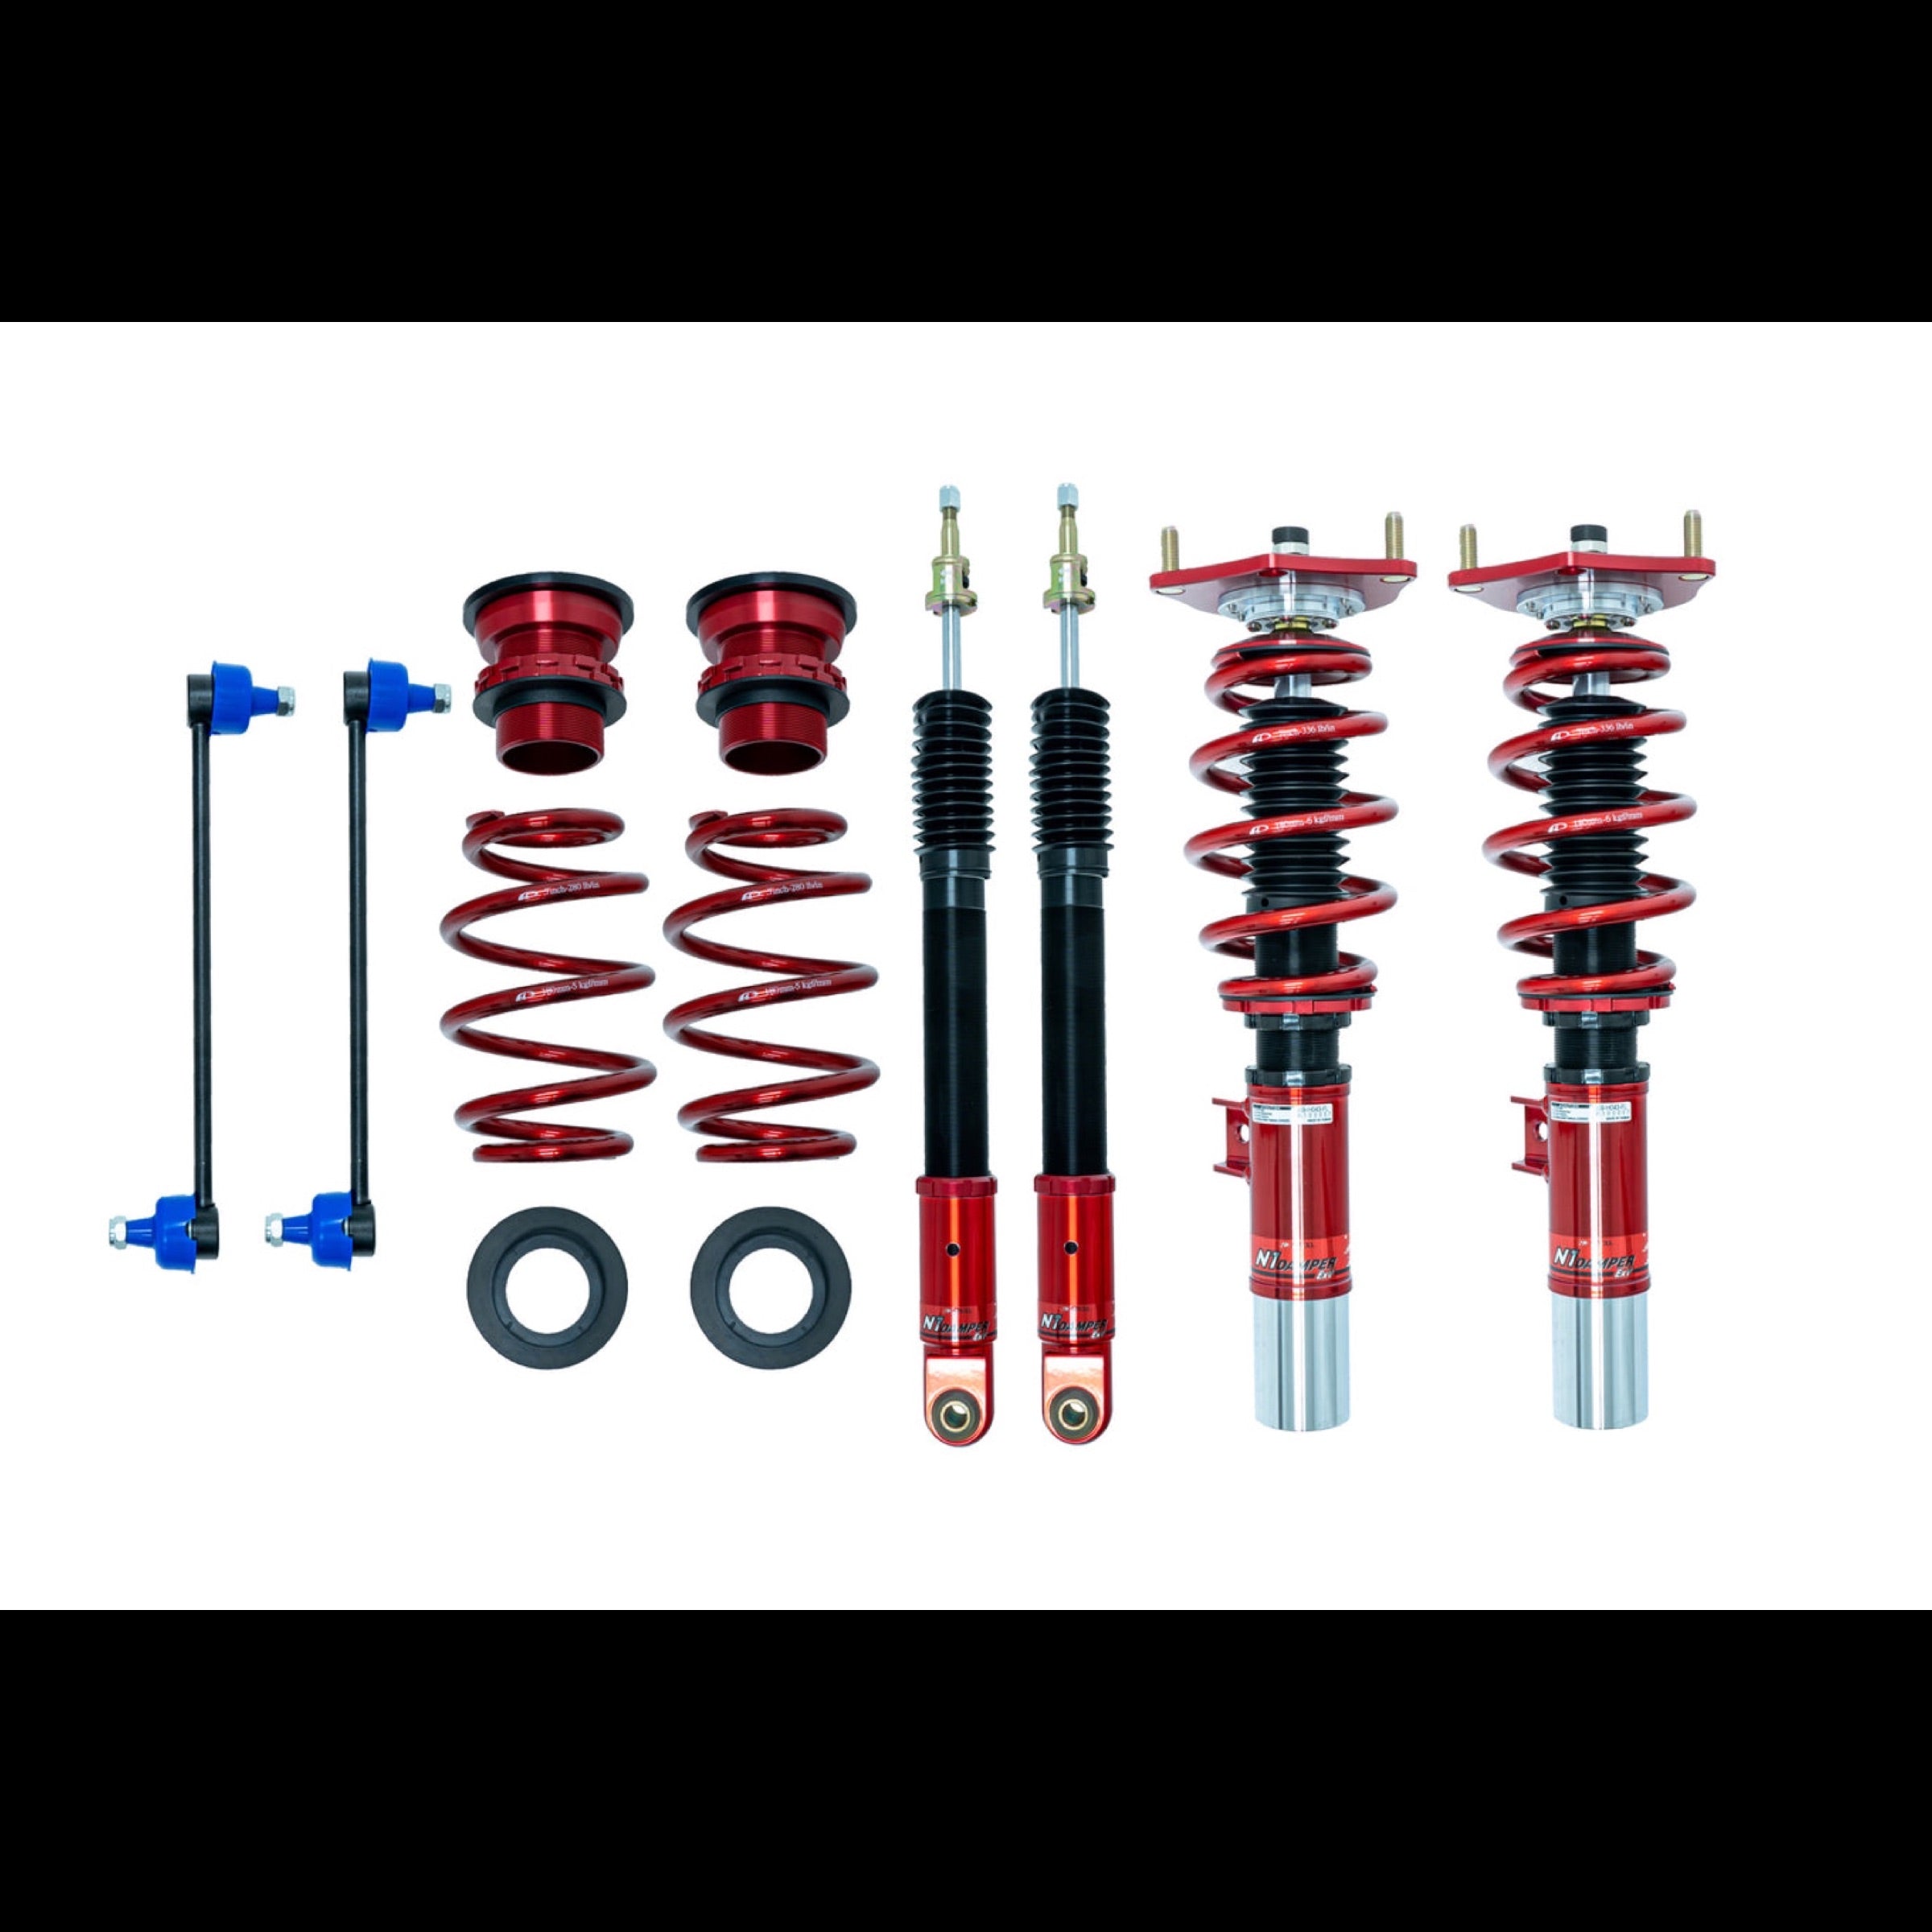 Apexi coilovers in red with white background for honda civic type R